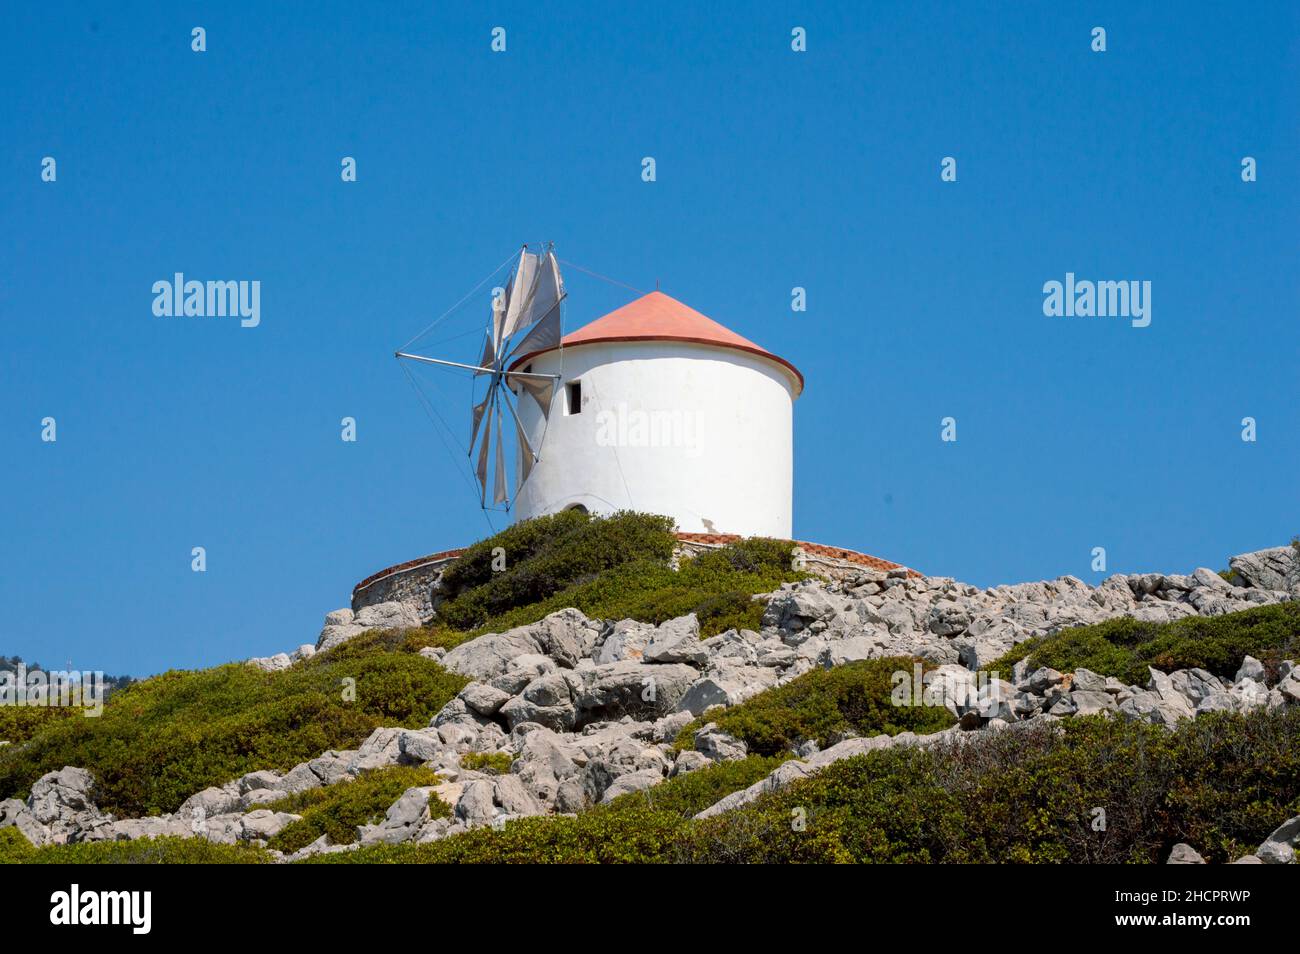 Monastery at Panormitis. Island of Symi Dodecanese. Detail of windmills Islands Aegean Sea. Greece Europe Stock Photo